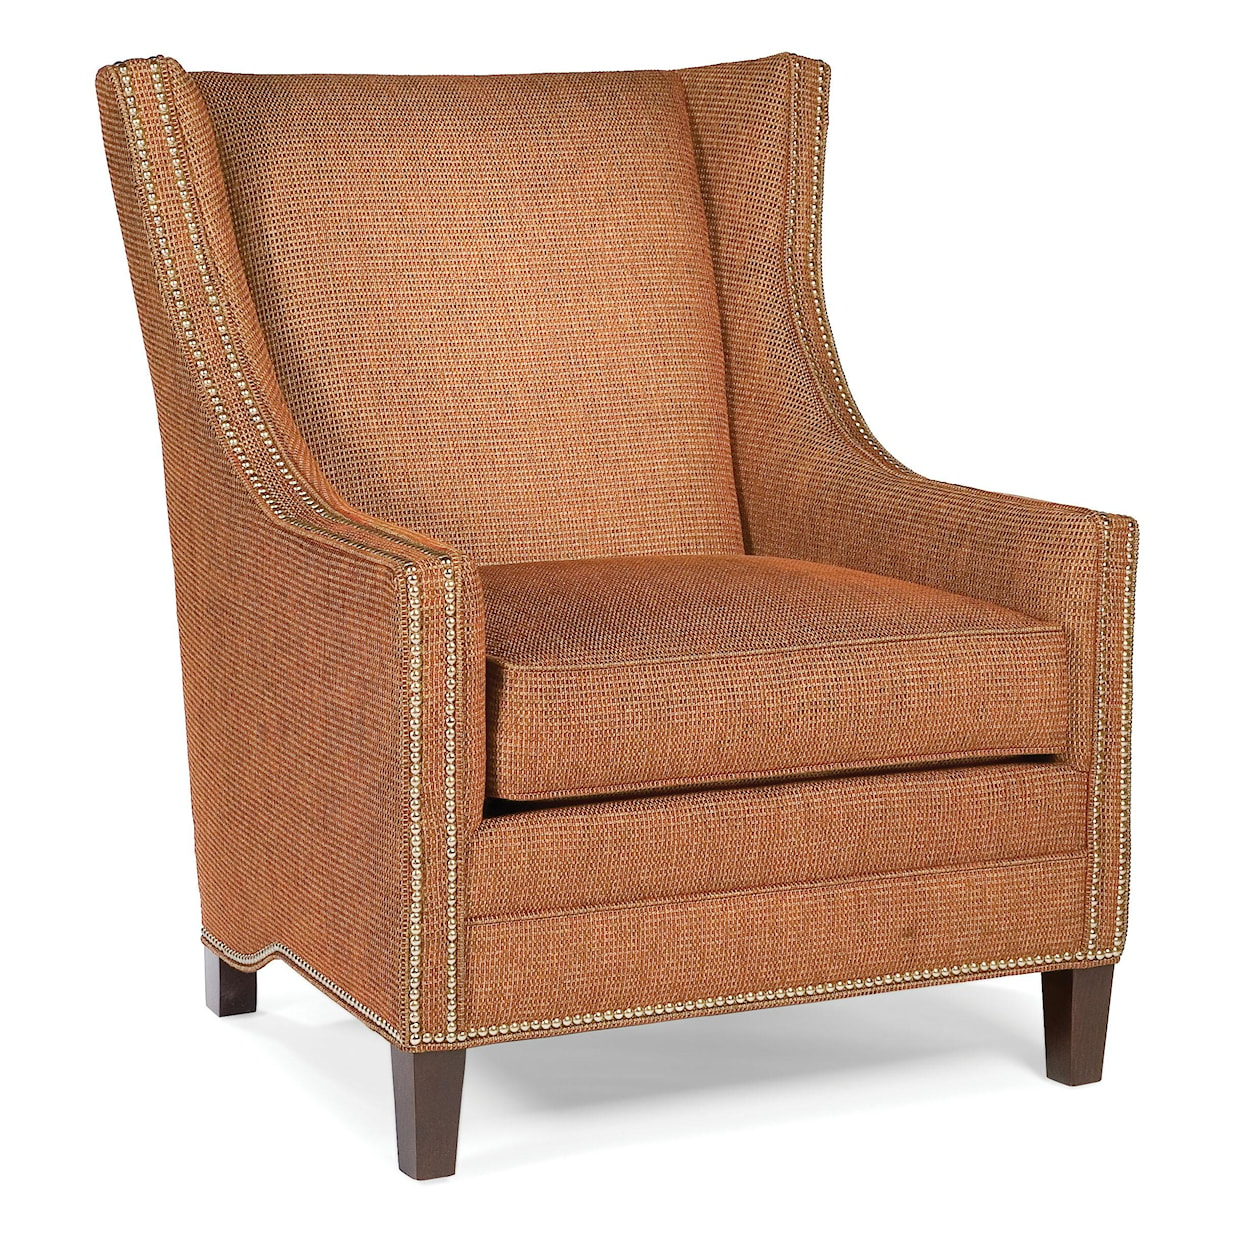 Fairfield Chairs Upholstered Lounge Chair